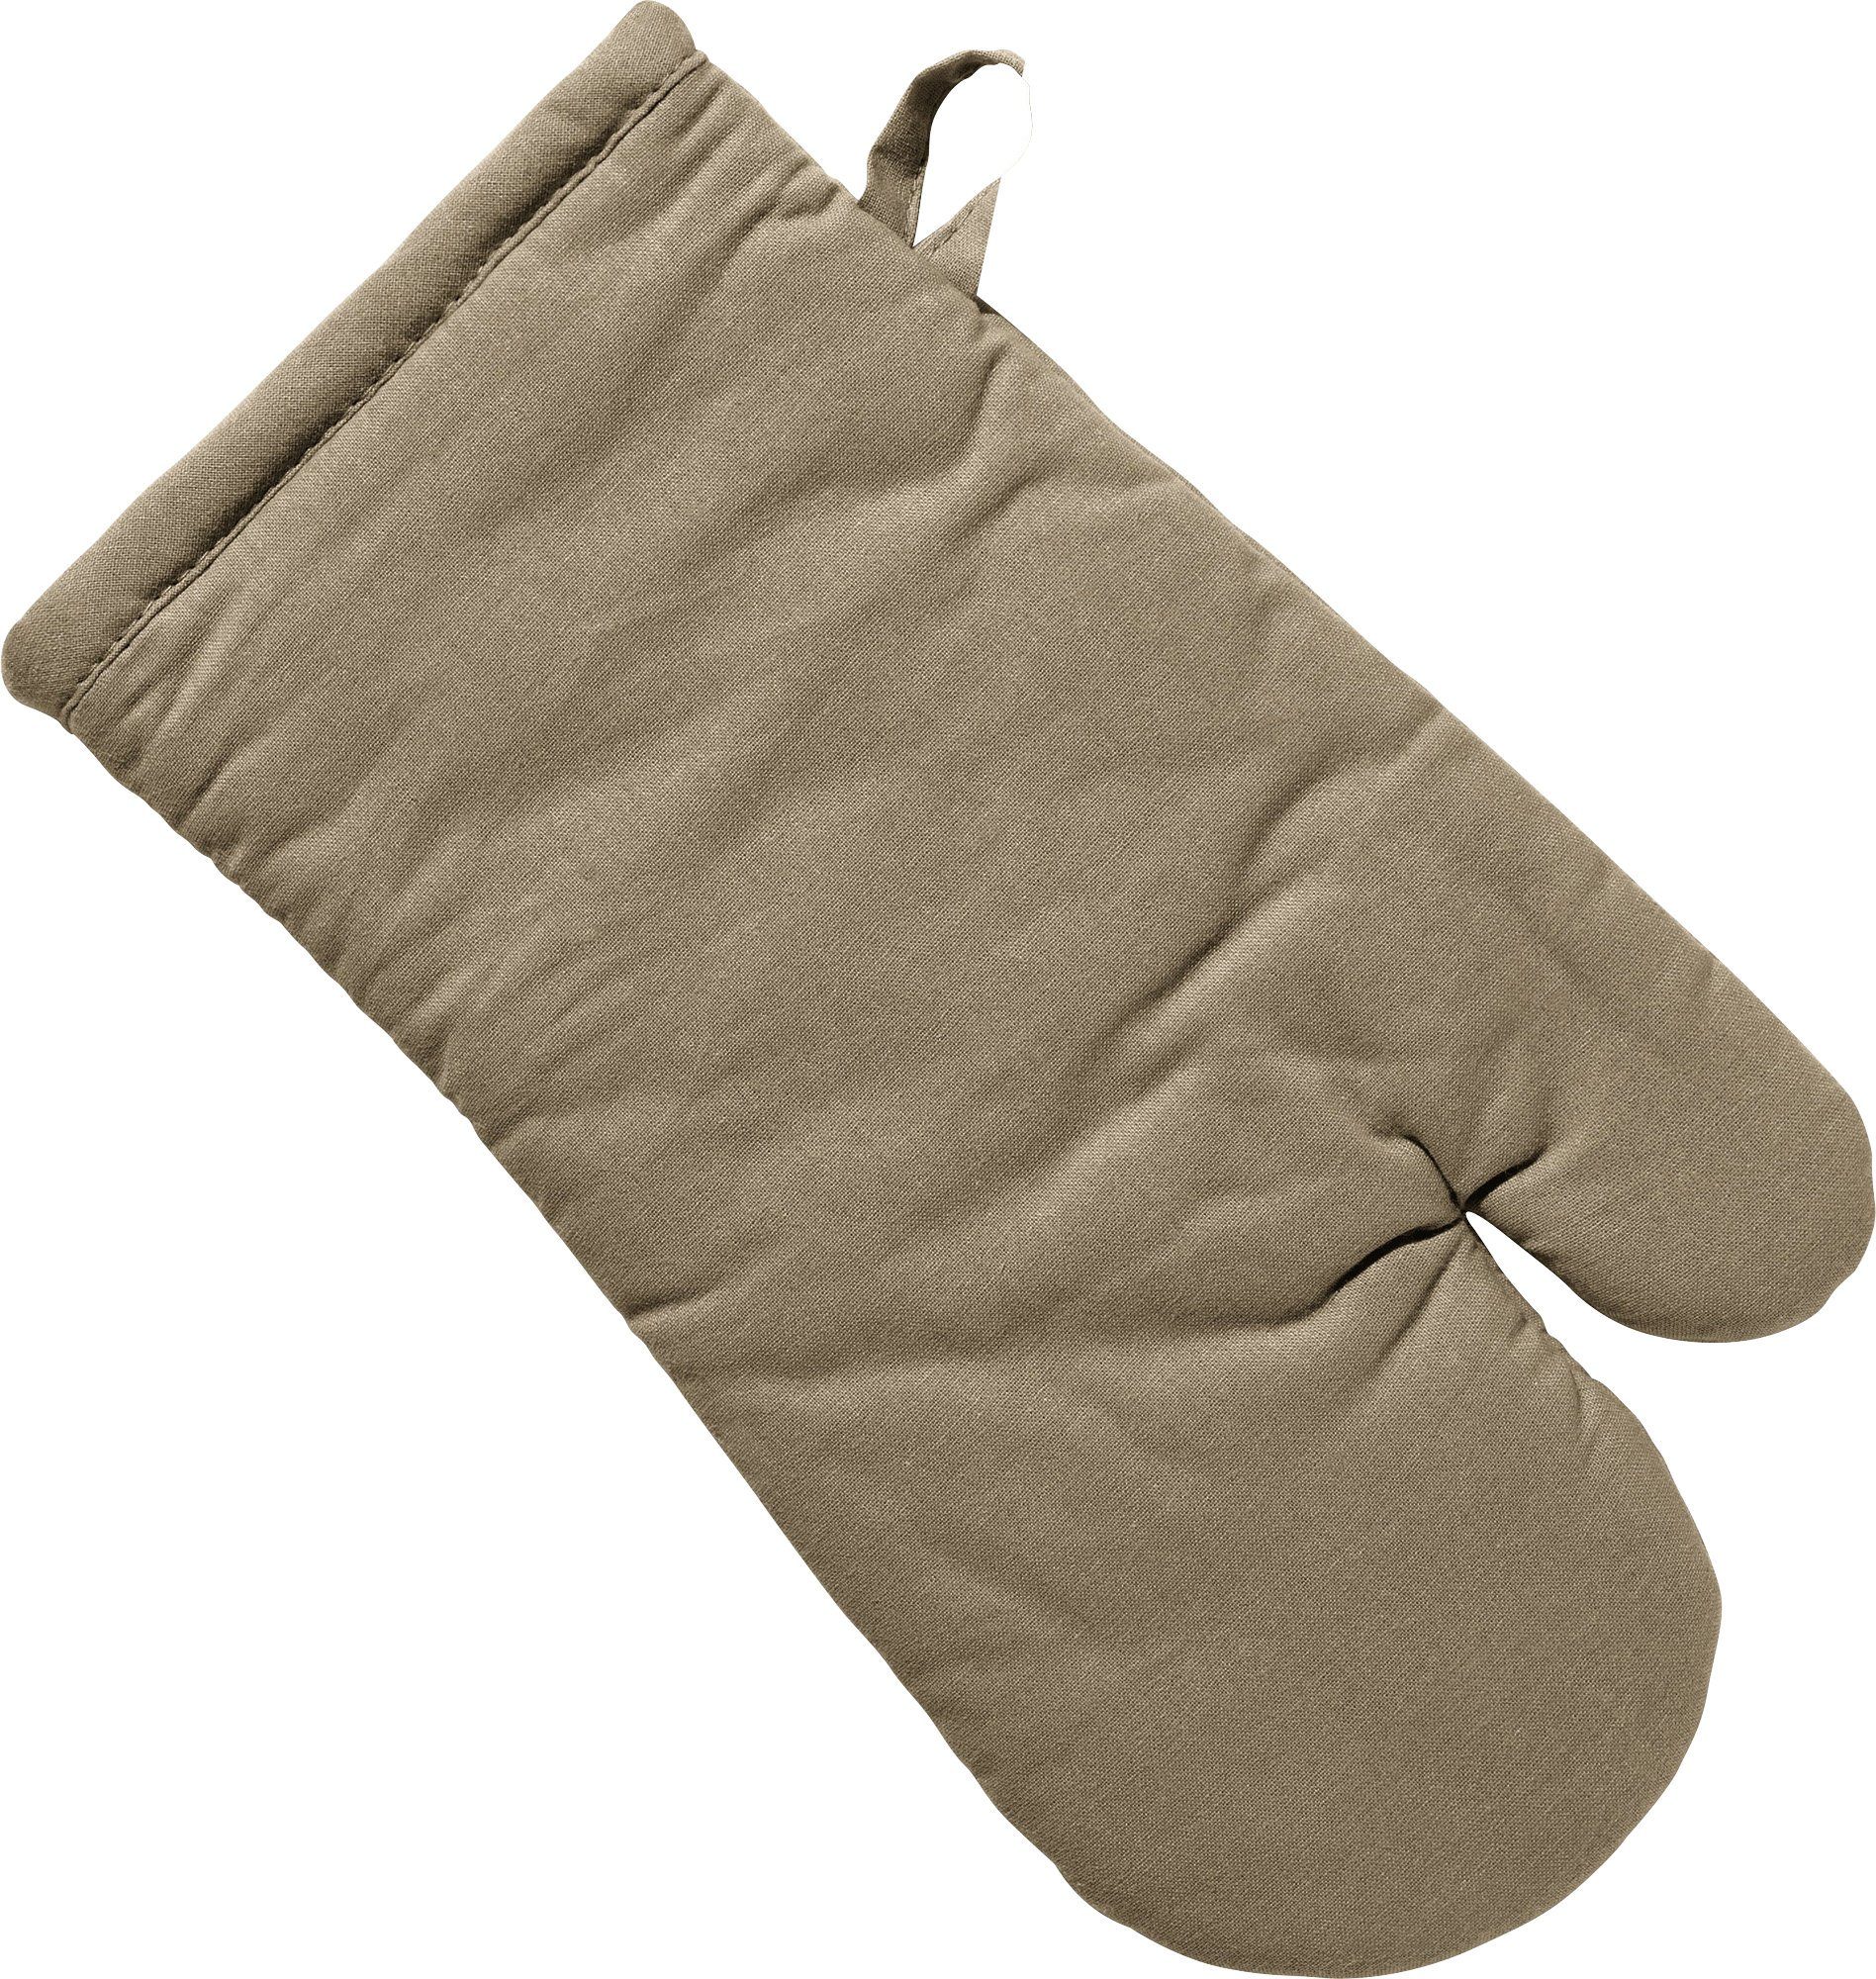 (1-tlg), REDBEST Uni Topflappen taupe "Seattle", Ofenhandschuh